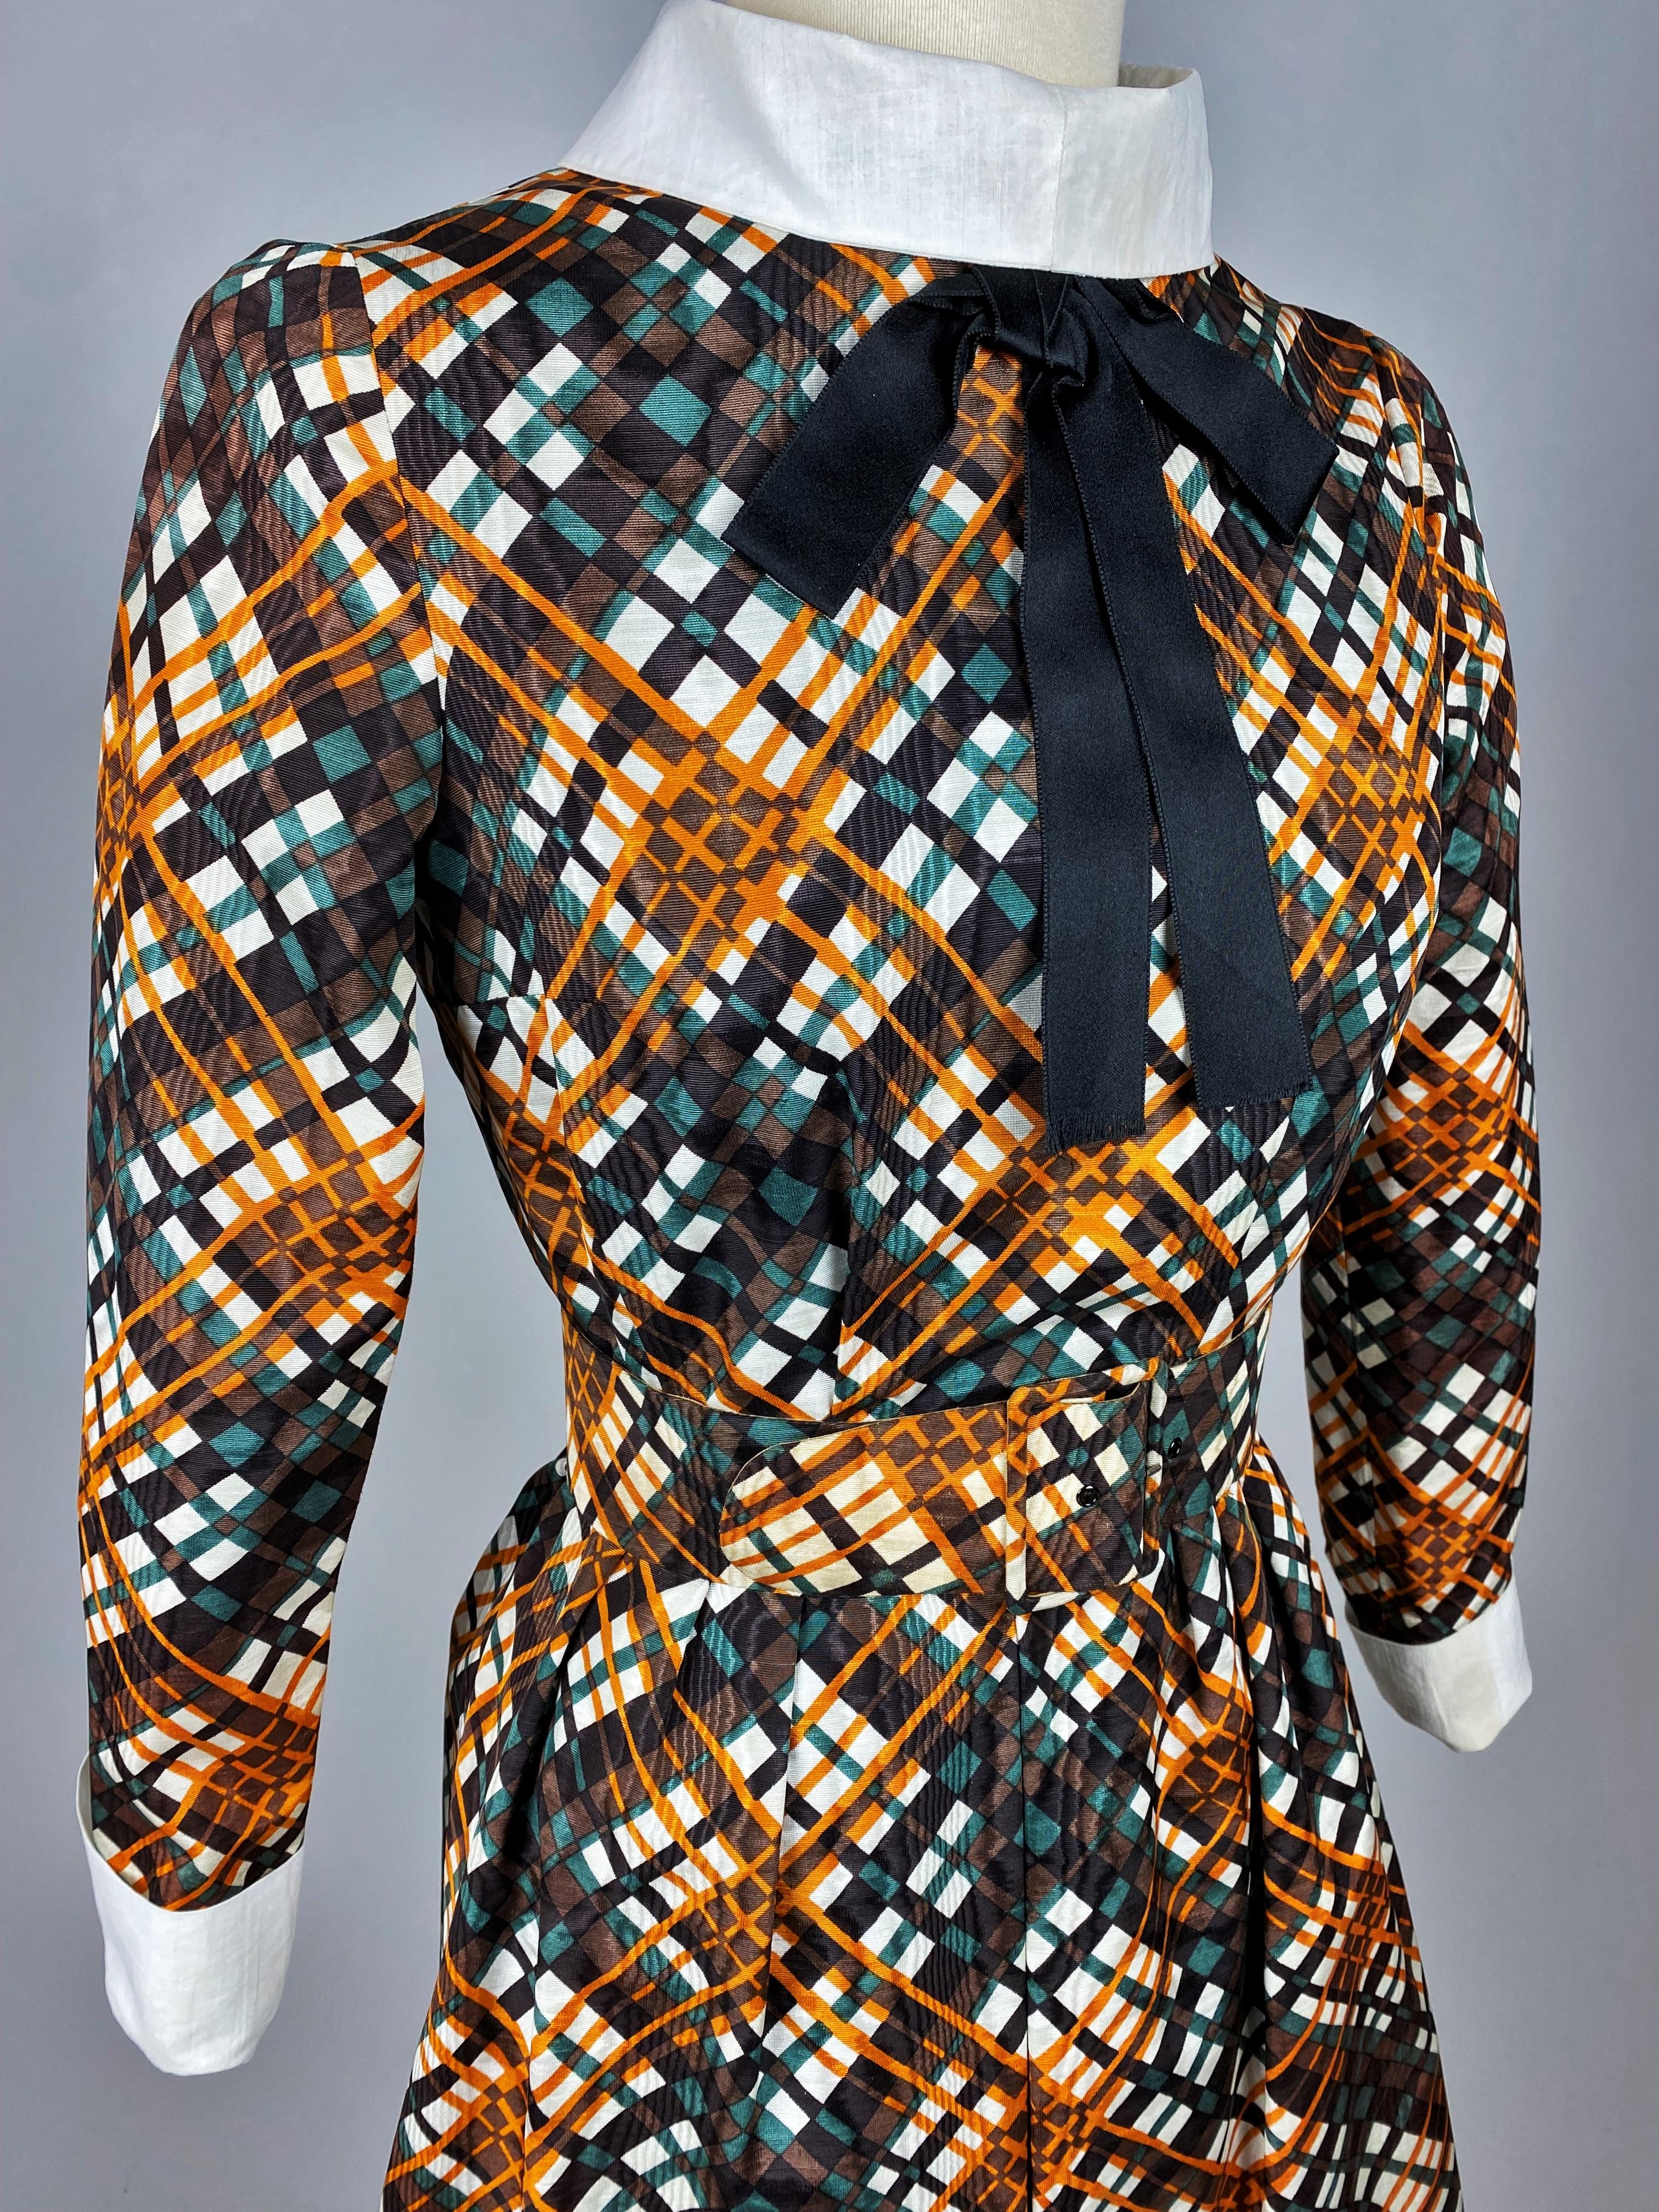 Women's Little dress by Michel Goma for Jean Patou in checked silk moire Circa 1965